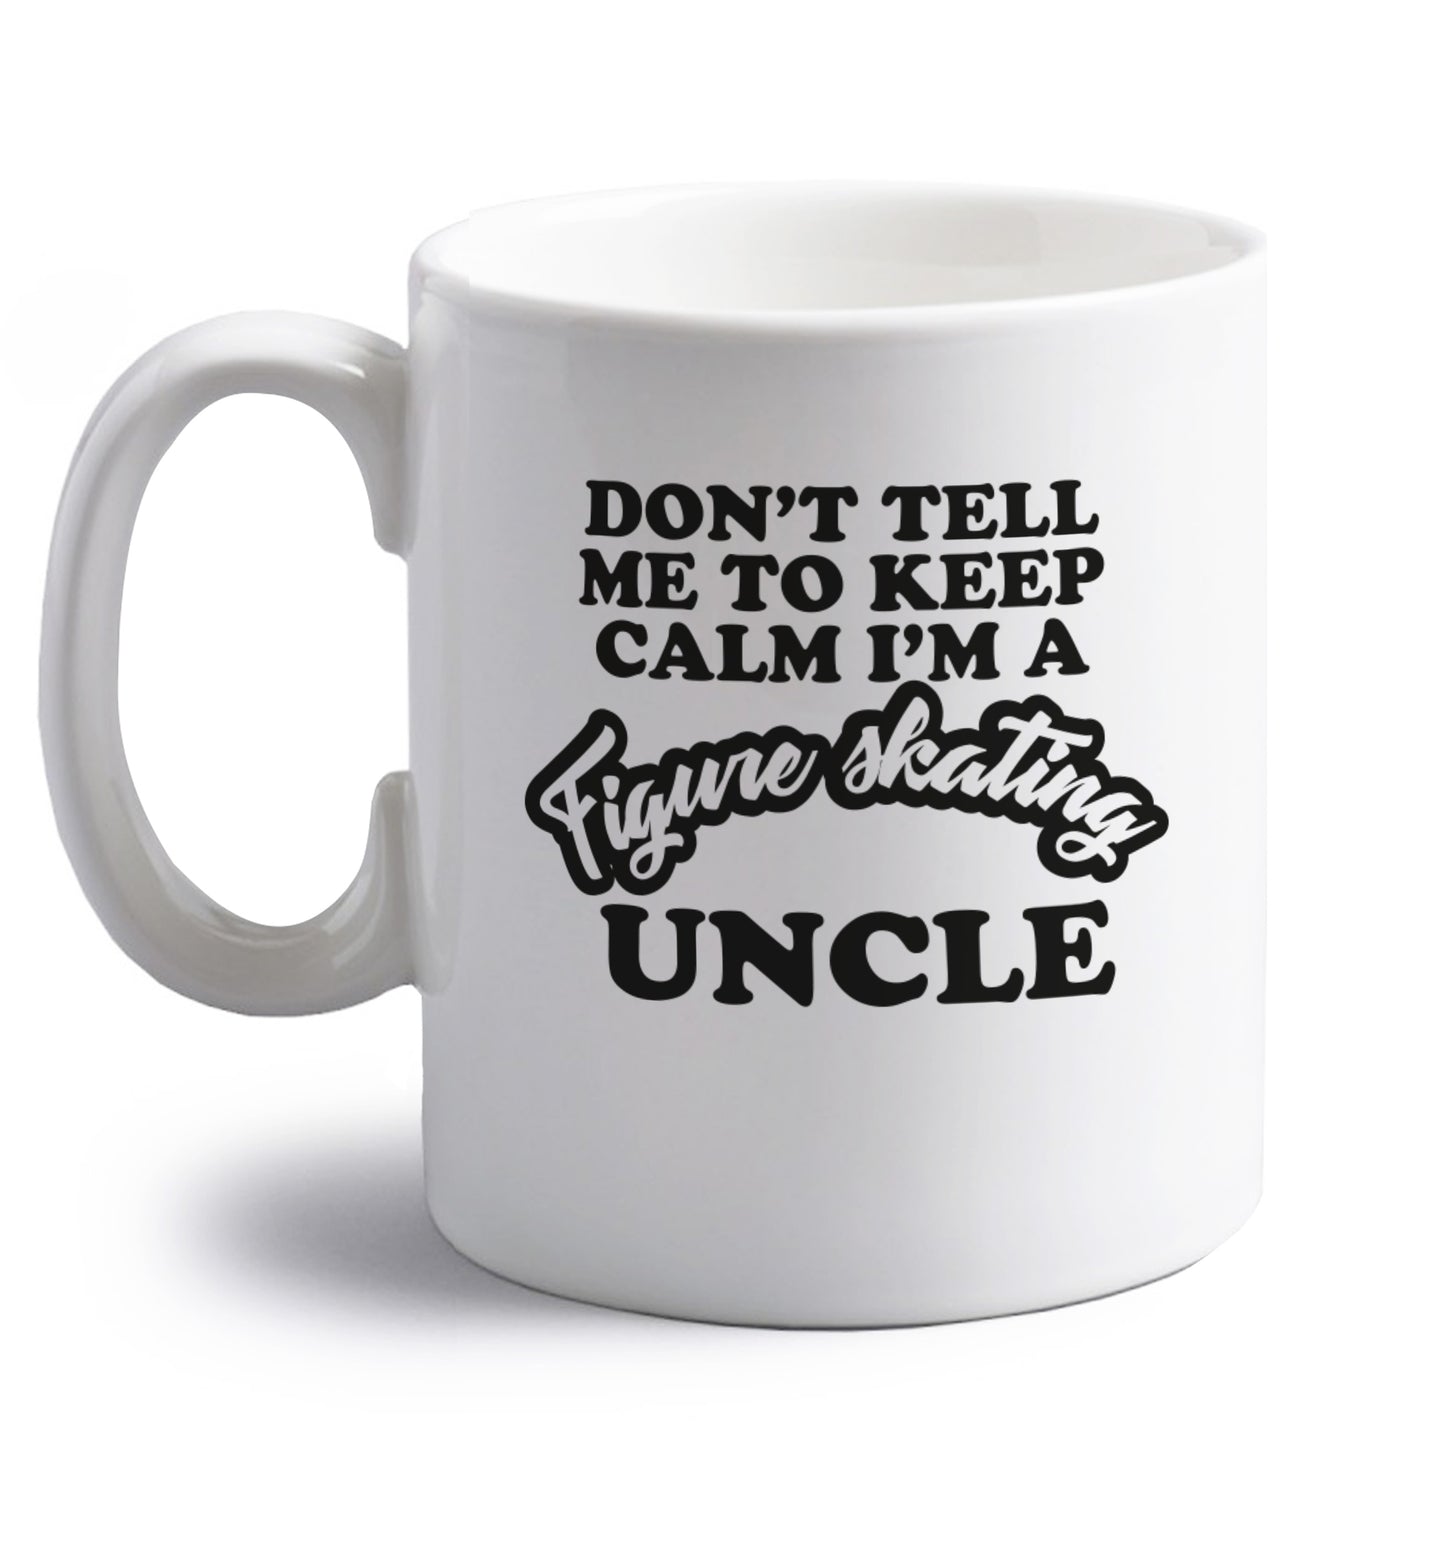 Don't tell me to keep calm I'm a figure skating uncle right handed white ceramic mug 